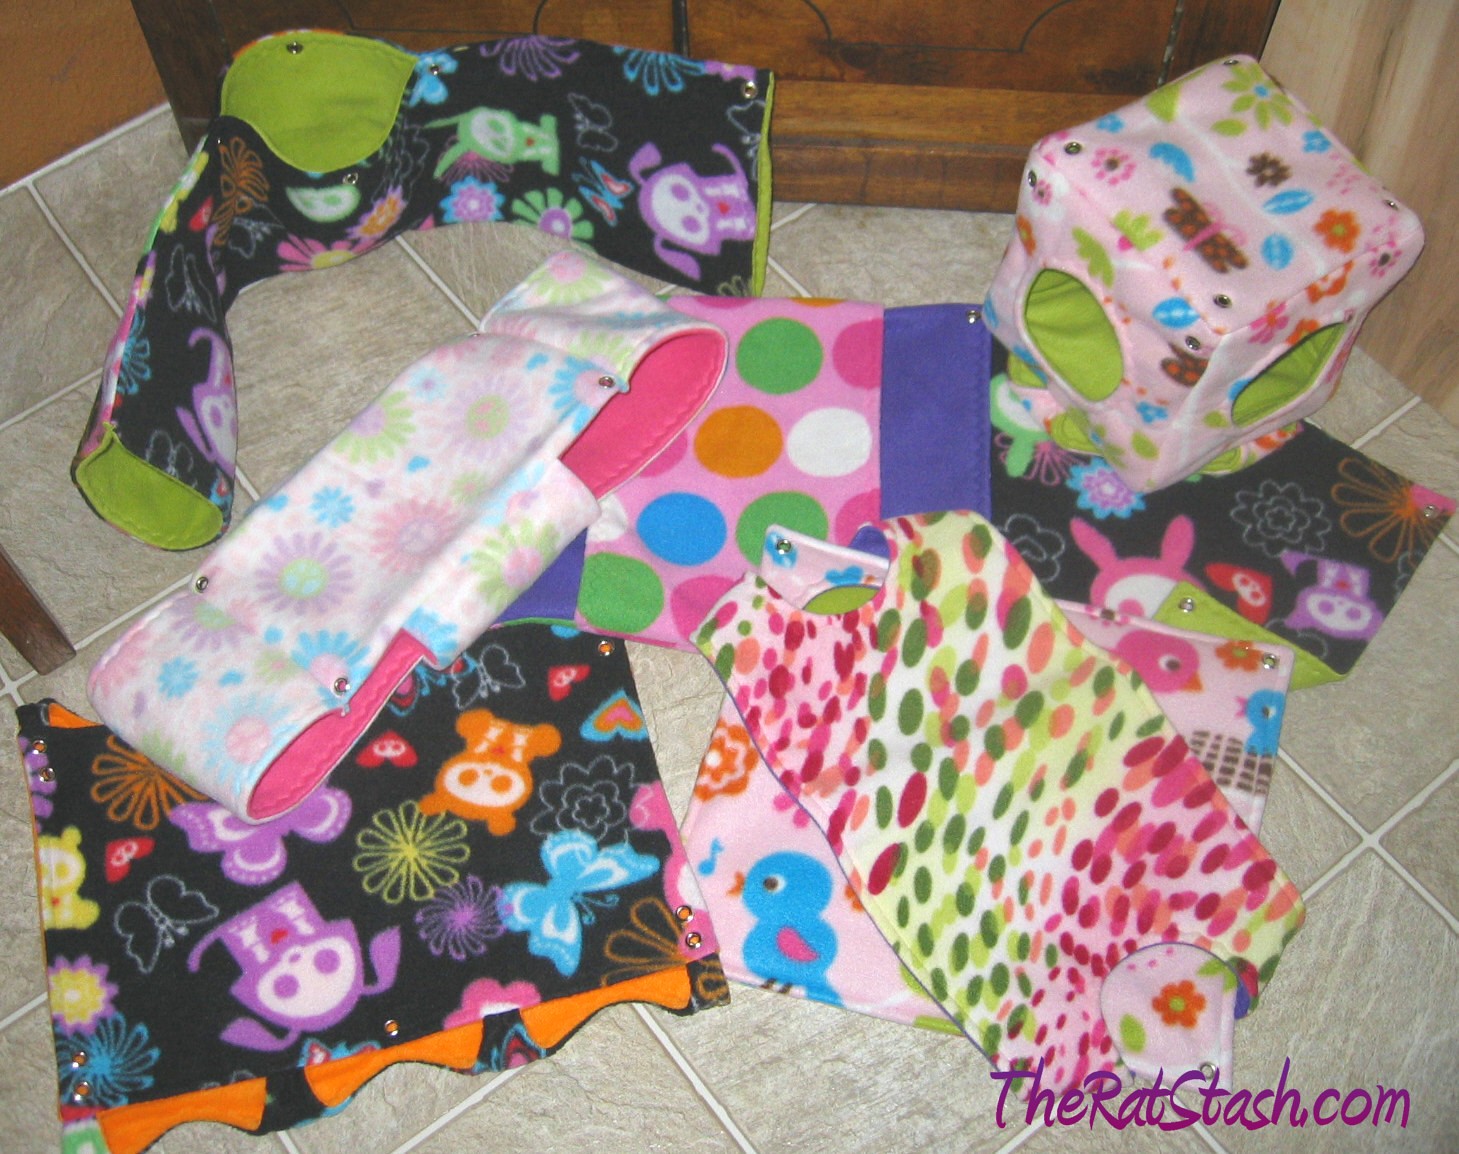 For Mary: "All Fleece" Spoiled Rotten Package & PopNPlayMat in "circles/flowers girl fabric"